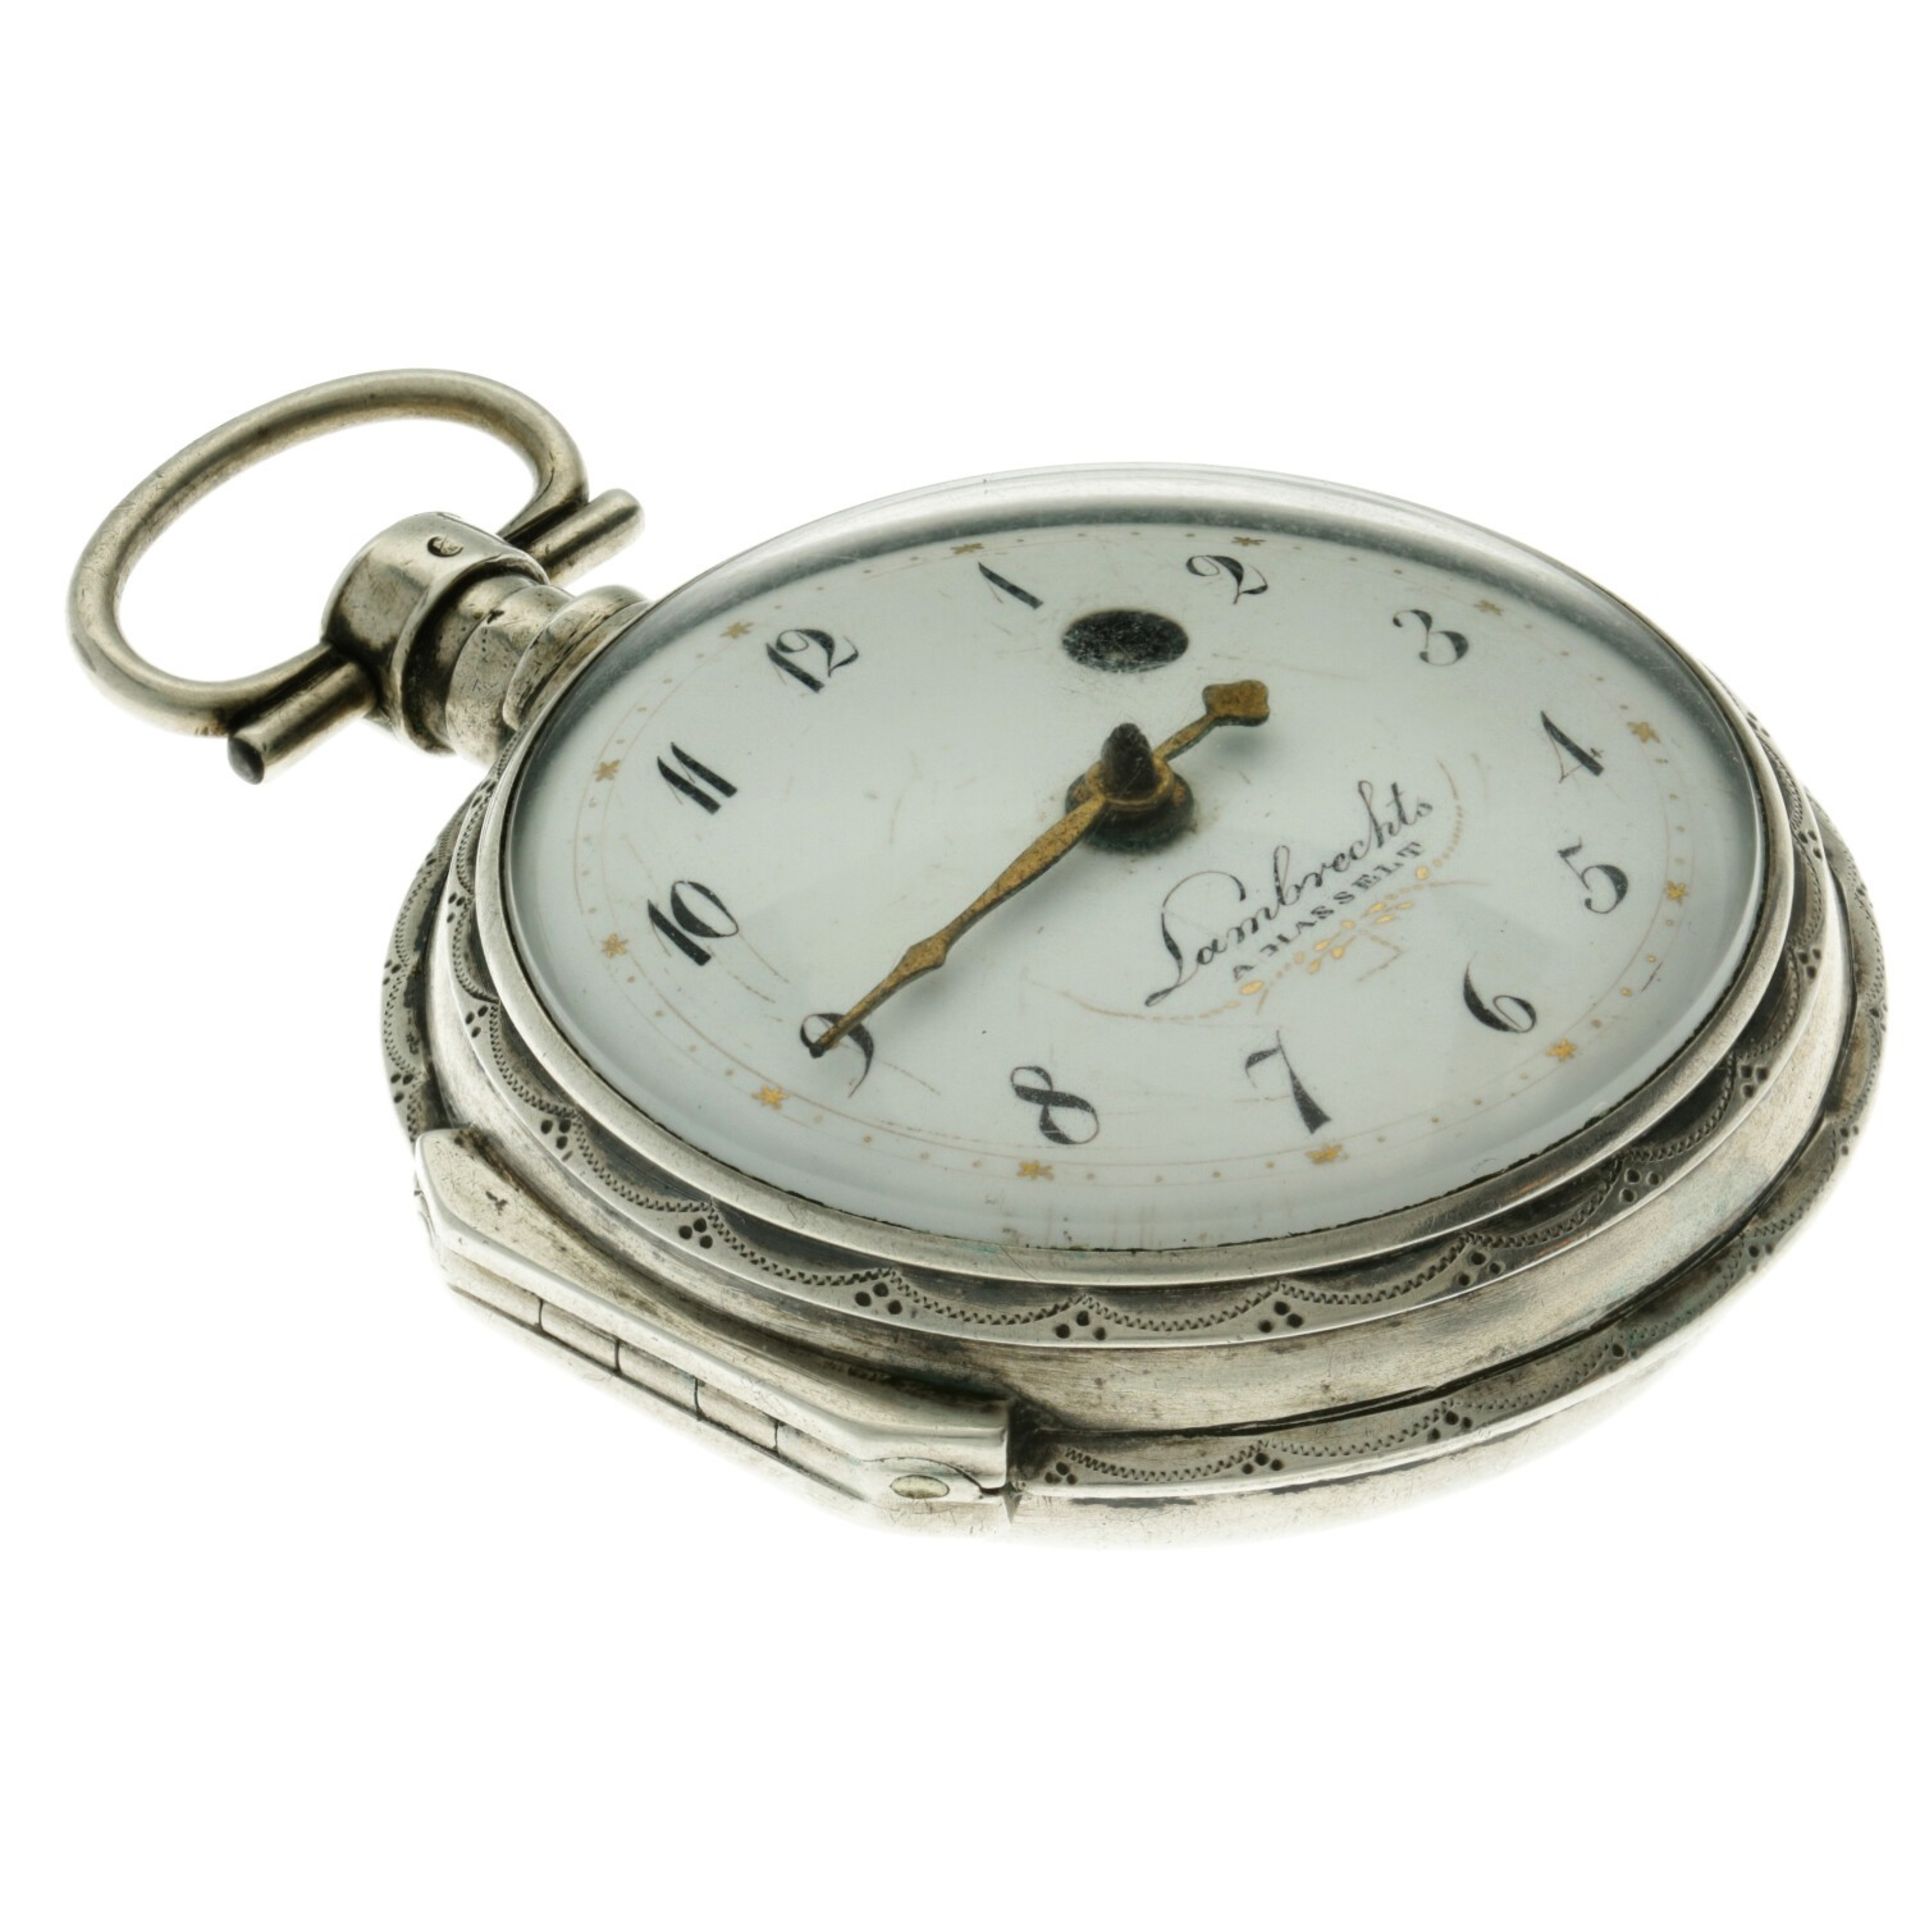 No Reserve - Lambrechts silver (925/1000) Verge Fusee - Men's pocketwatch - approx. 1850 Hasselt, Th - Image 4 of 4